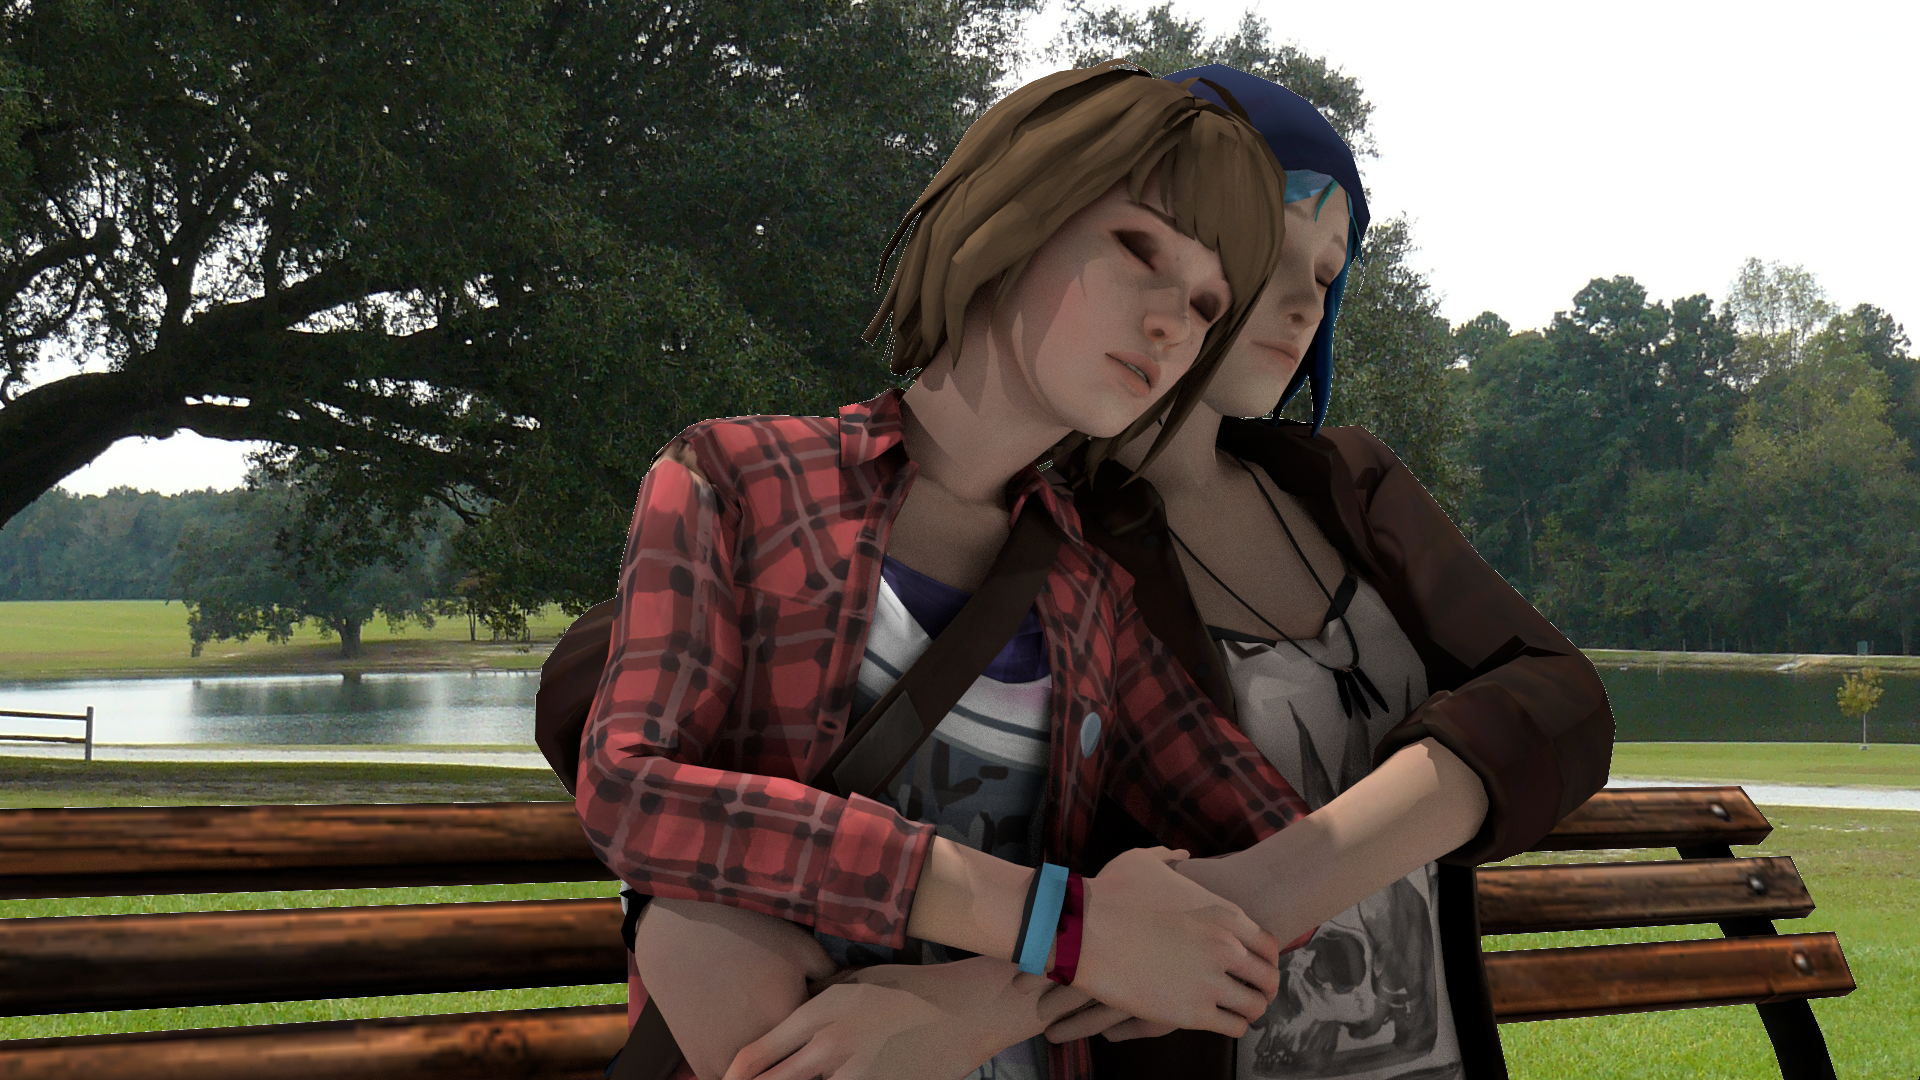 General 1920x1080 Life Is Strange Chloe Price Max Caulfield Square Enix video games PC gaming screen shot video game characters video game girls Skull T-Shirt lesbians two women